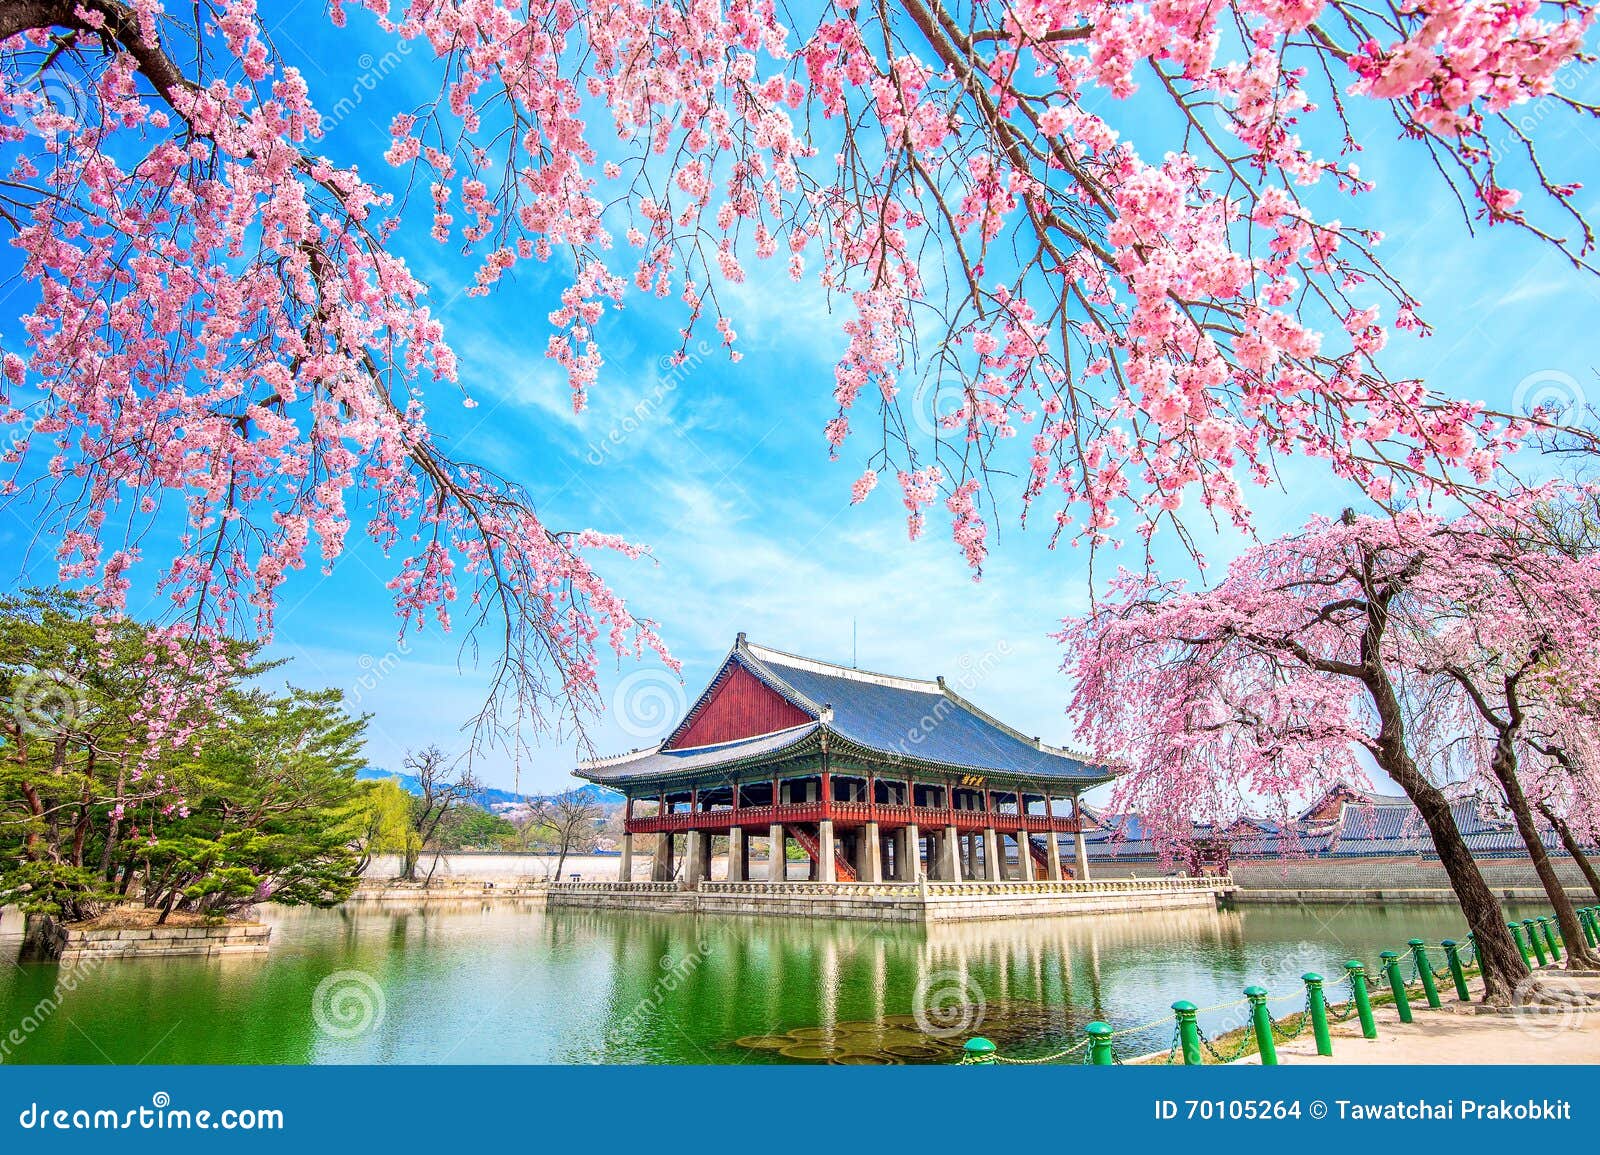 gyeongbokgung palace with cherry blossom in spring, korea.